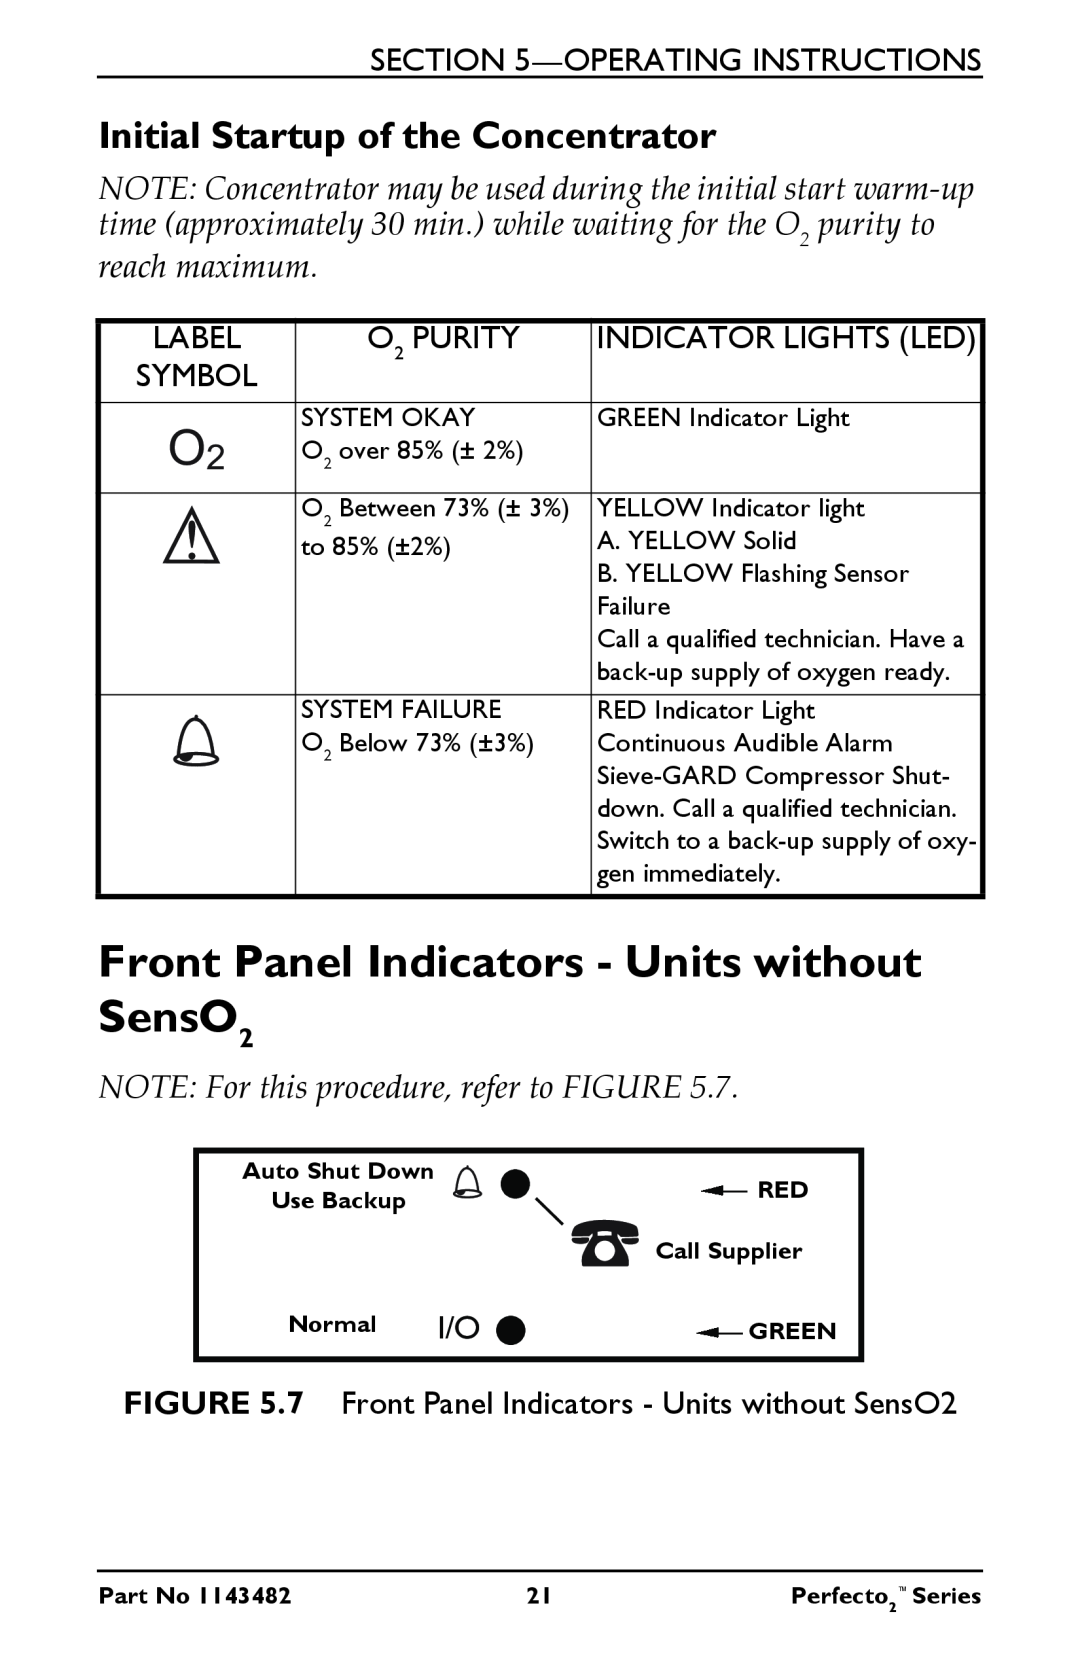 Invacare IRC5PO2V Front Panel Indicators - Units without SensO2, Initial Startup of the Concentrator, O2 PURITY, Symbol 